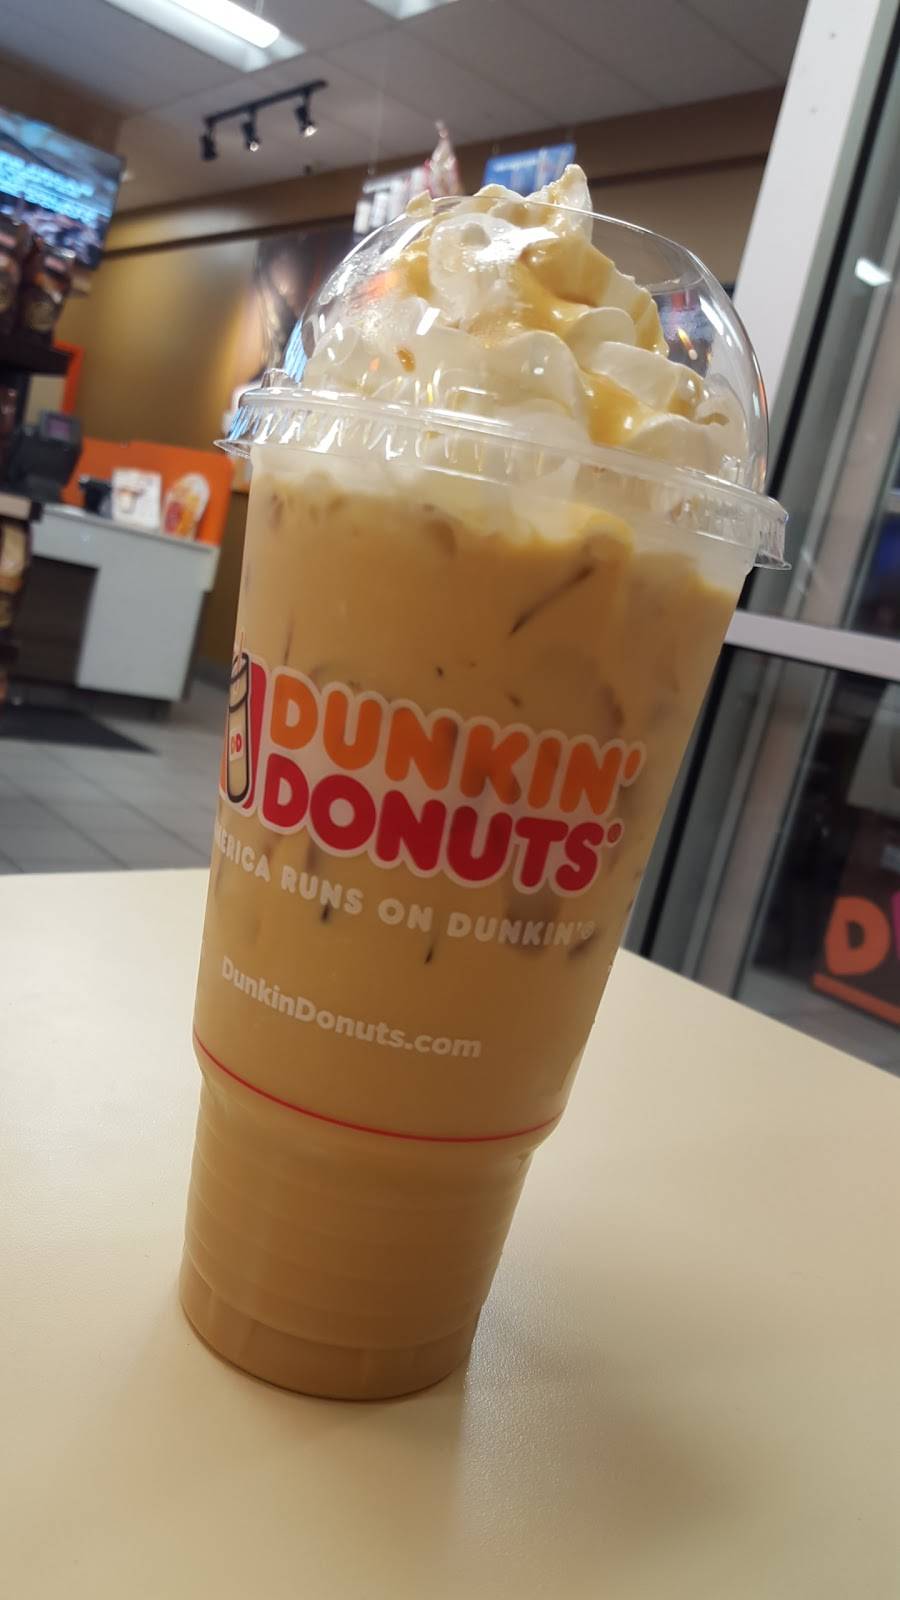 Dunkin Donuts | cafe | 4108 Tonnelle Ave, North Bergen, NJ 07047, USA | 2013483700 OR +1 201-348-3700